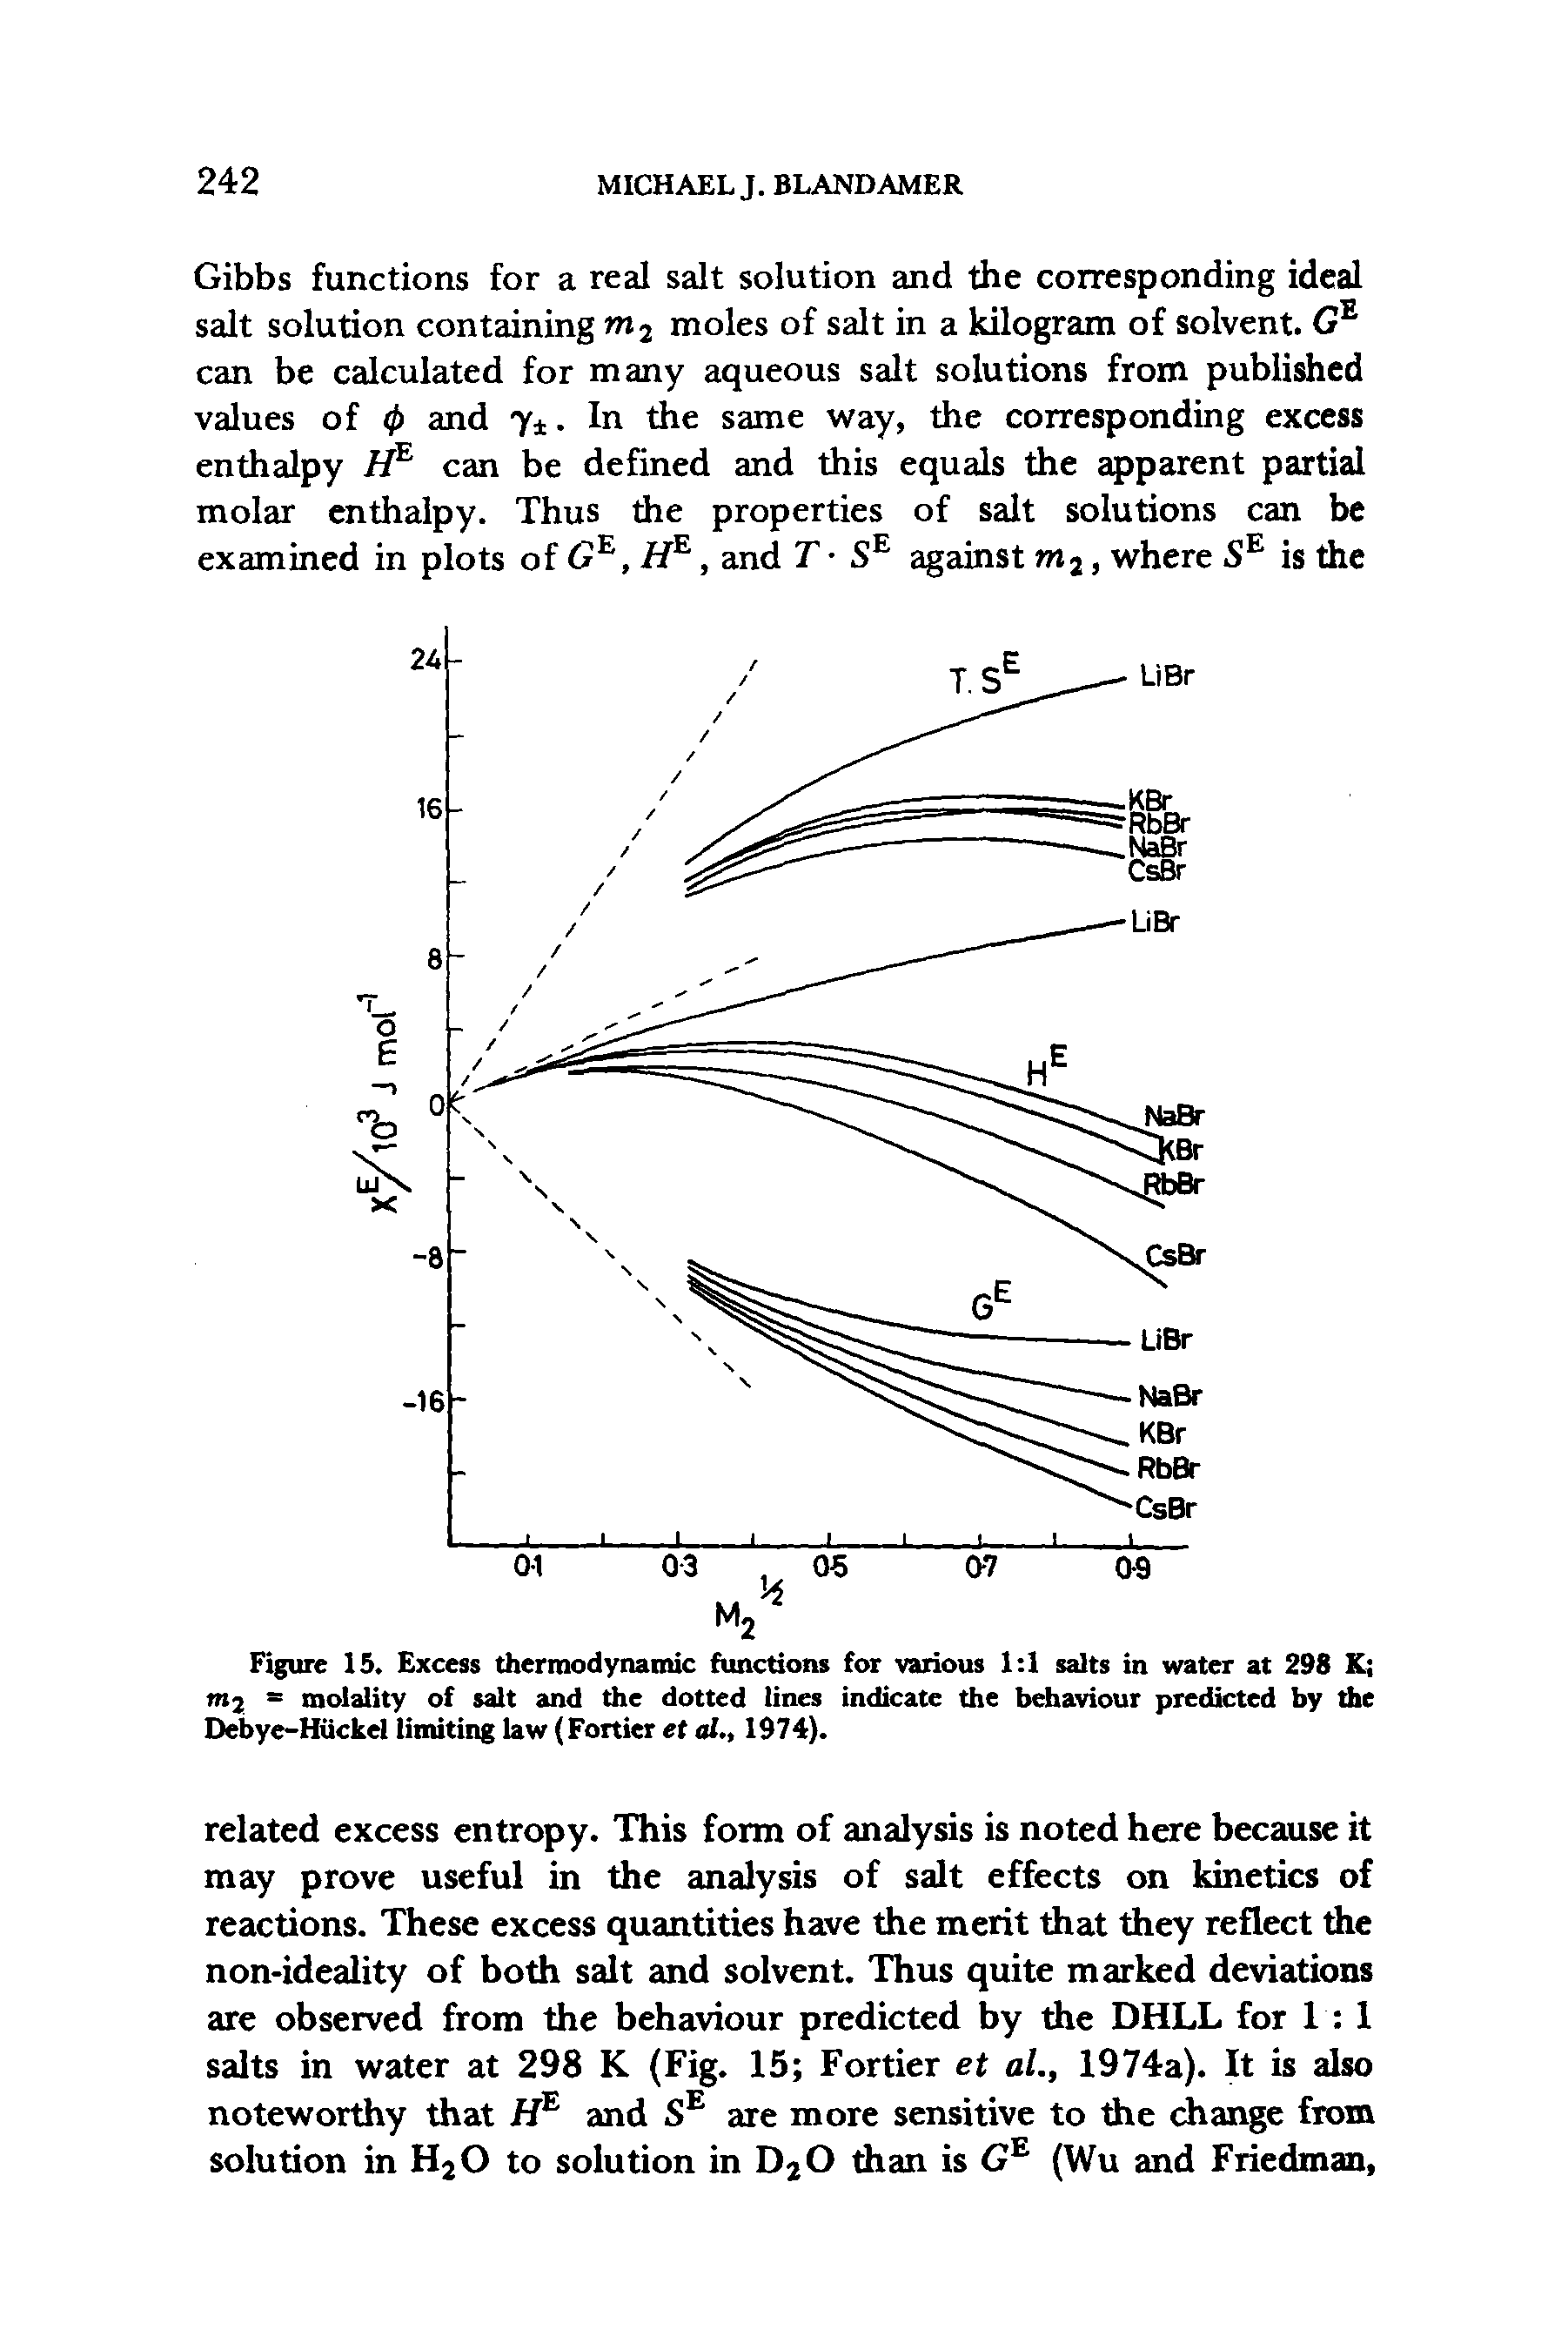 Figure 15. Excess thermodynamic functions for various 1 1 salts in water at 298 Kj mj = molality of salt and the dotted lines indicate the behaviour predicted by the Debye-Huckel limiting law (Fortier et al., 1974).